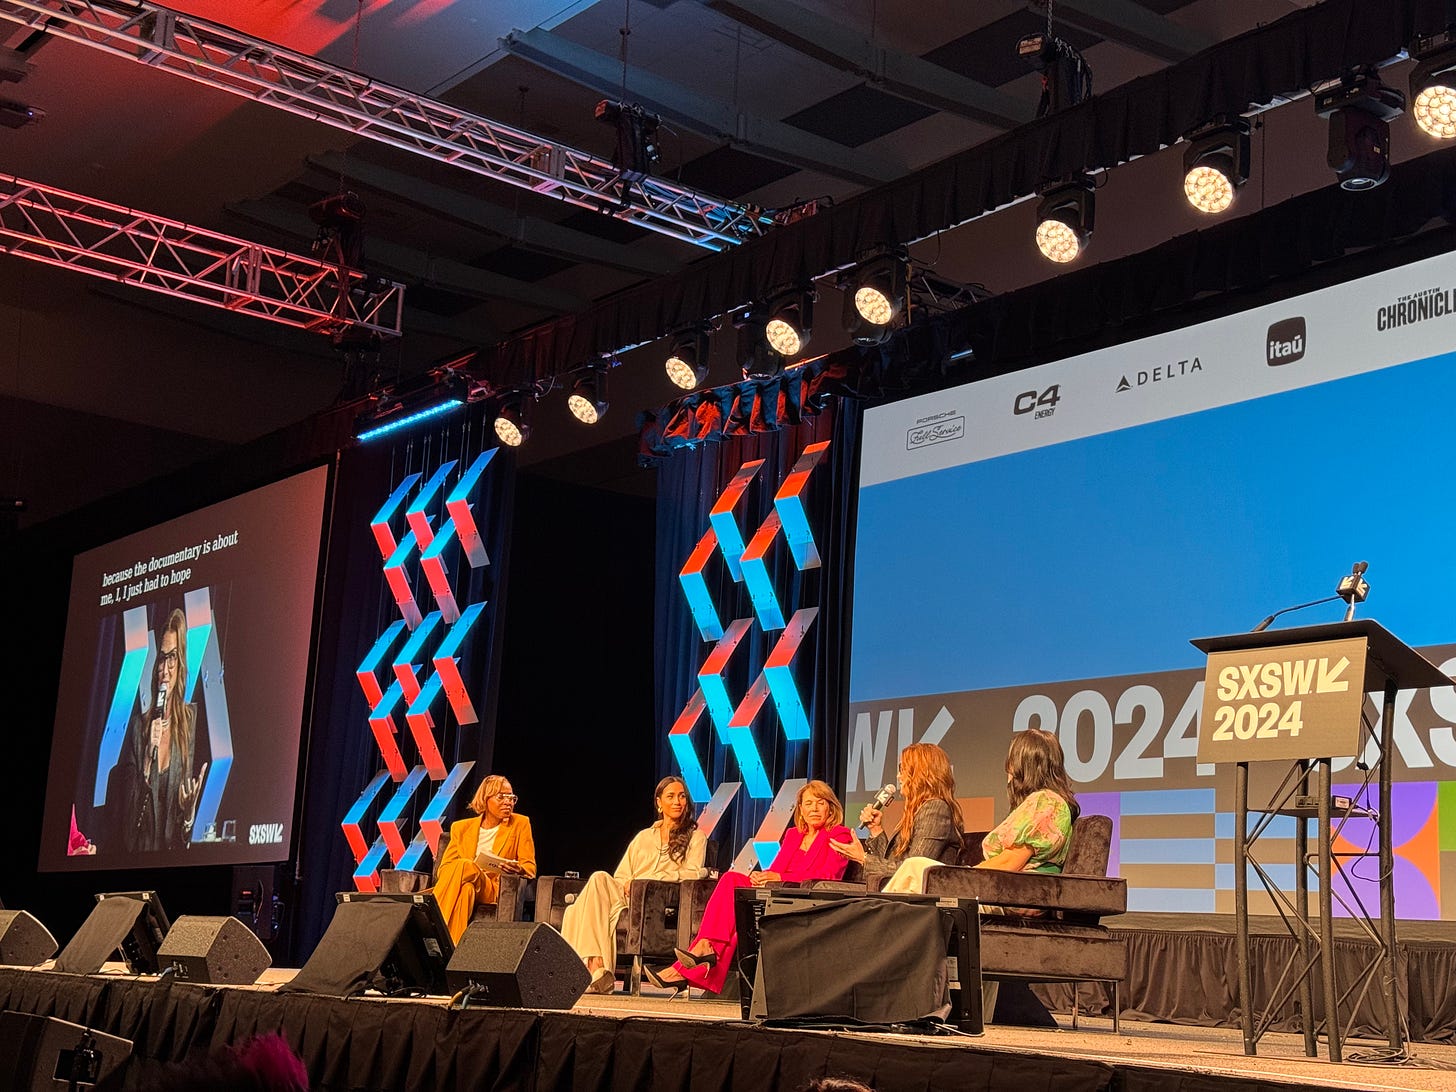 SXSW panel featuring (from left) Errin Haines, Meghan Markle, Katie Couric, Brooke Shields, and Nancy Wang Yuen. All sit in armchairs onstage with a colorful "SXSW 2024" marquee behind them.